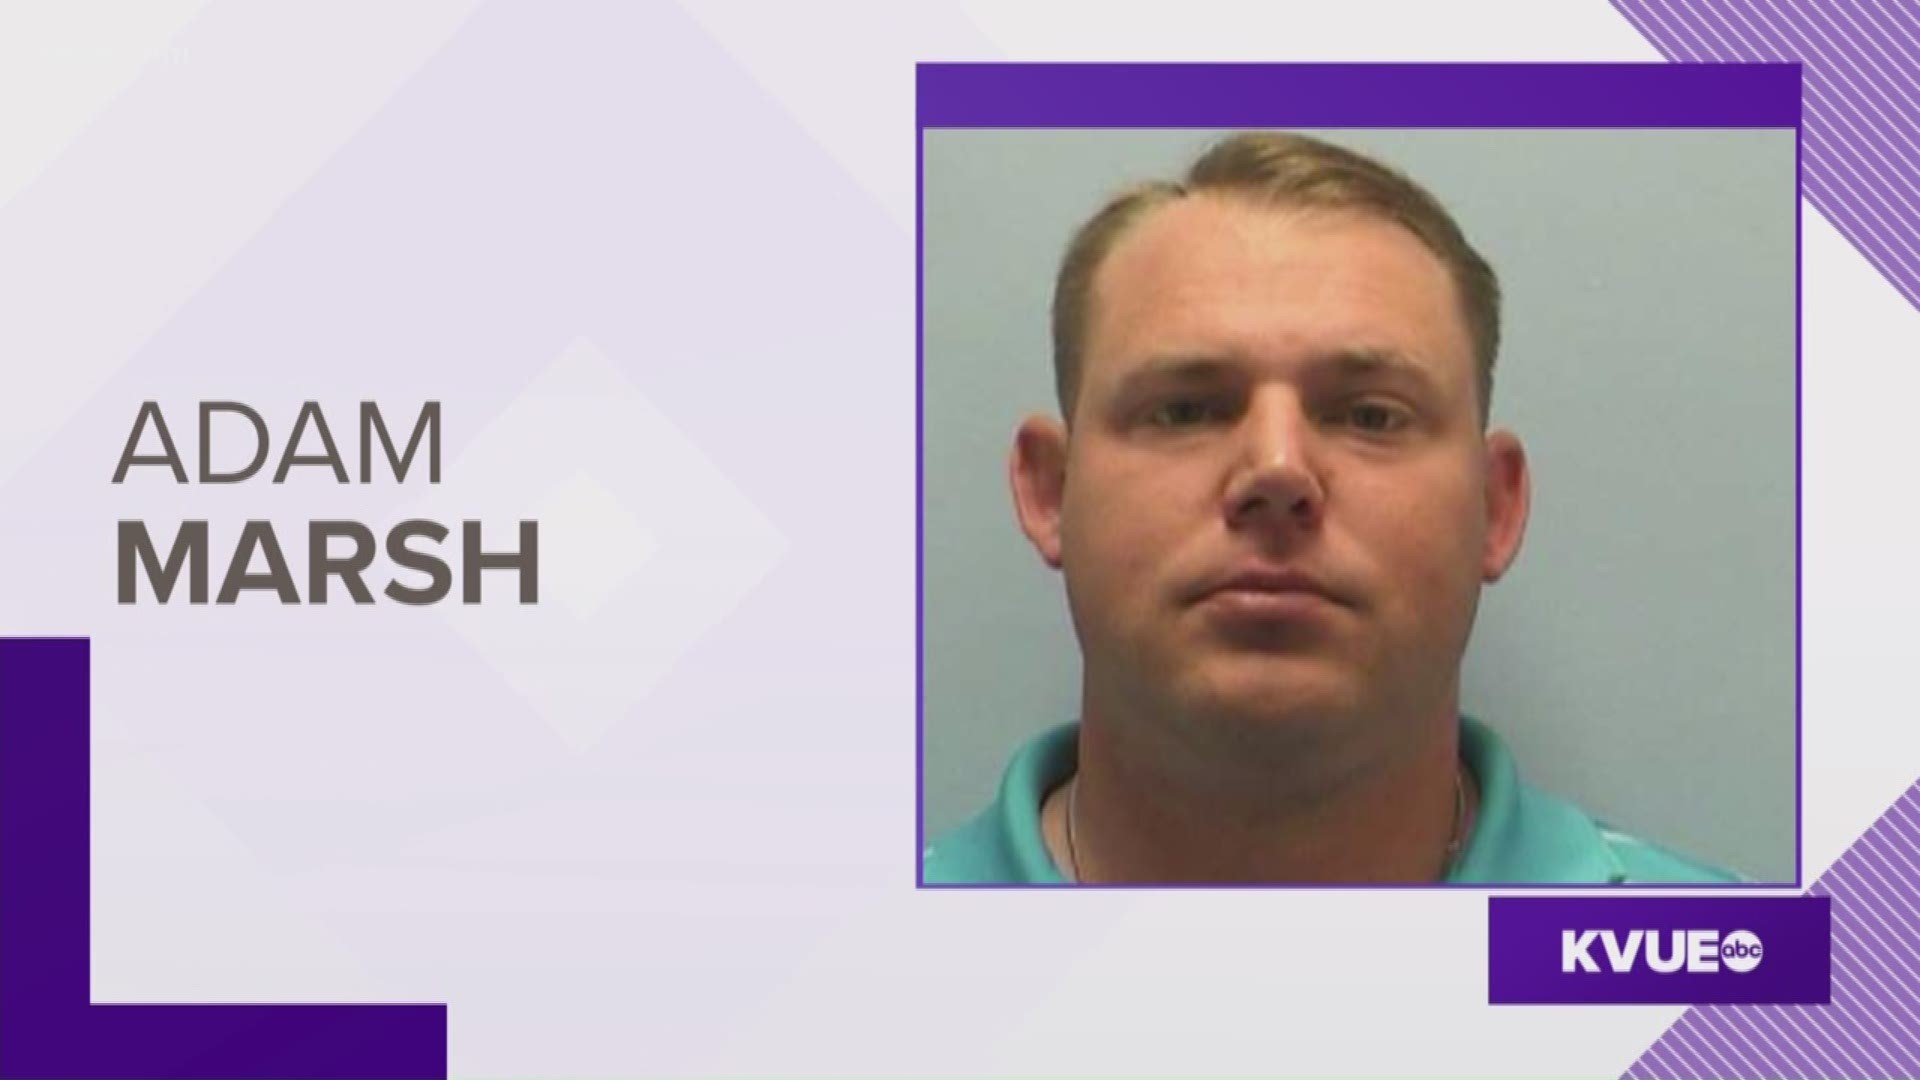 Adam Marsh is accused of hitting a woman with his truck and driving off.